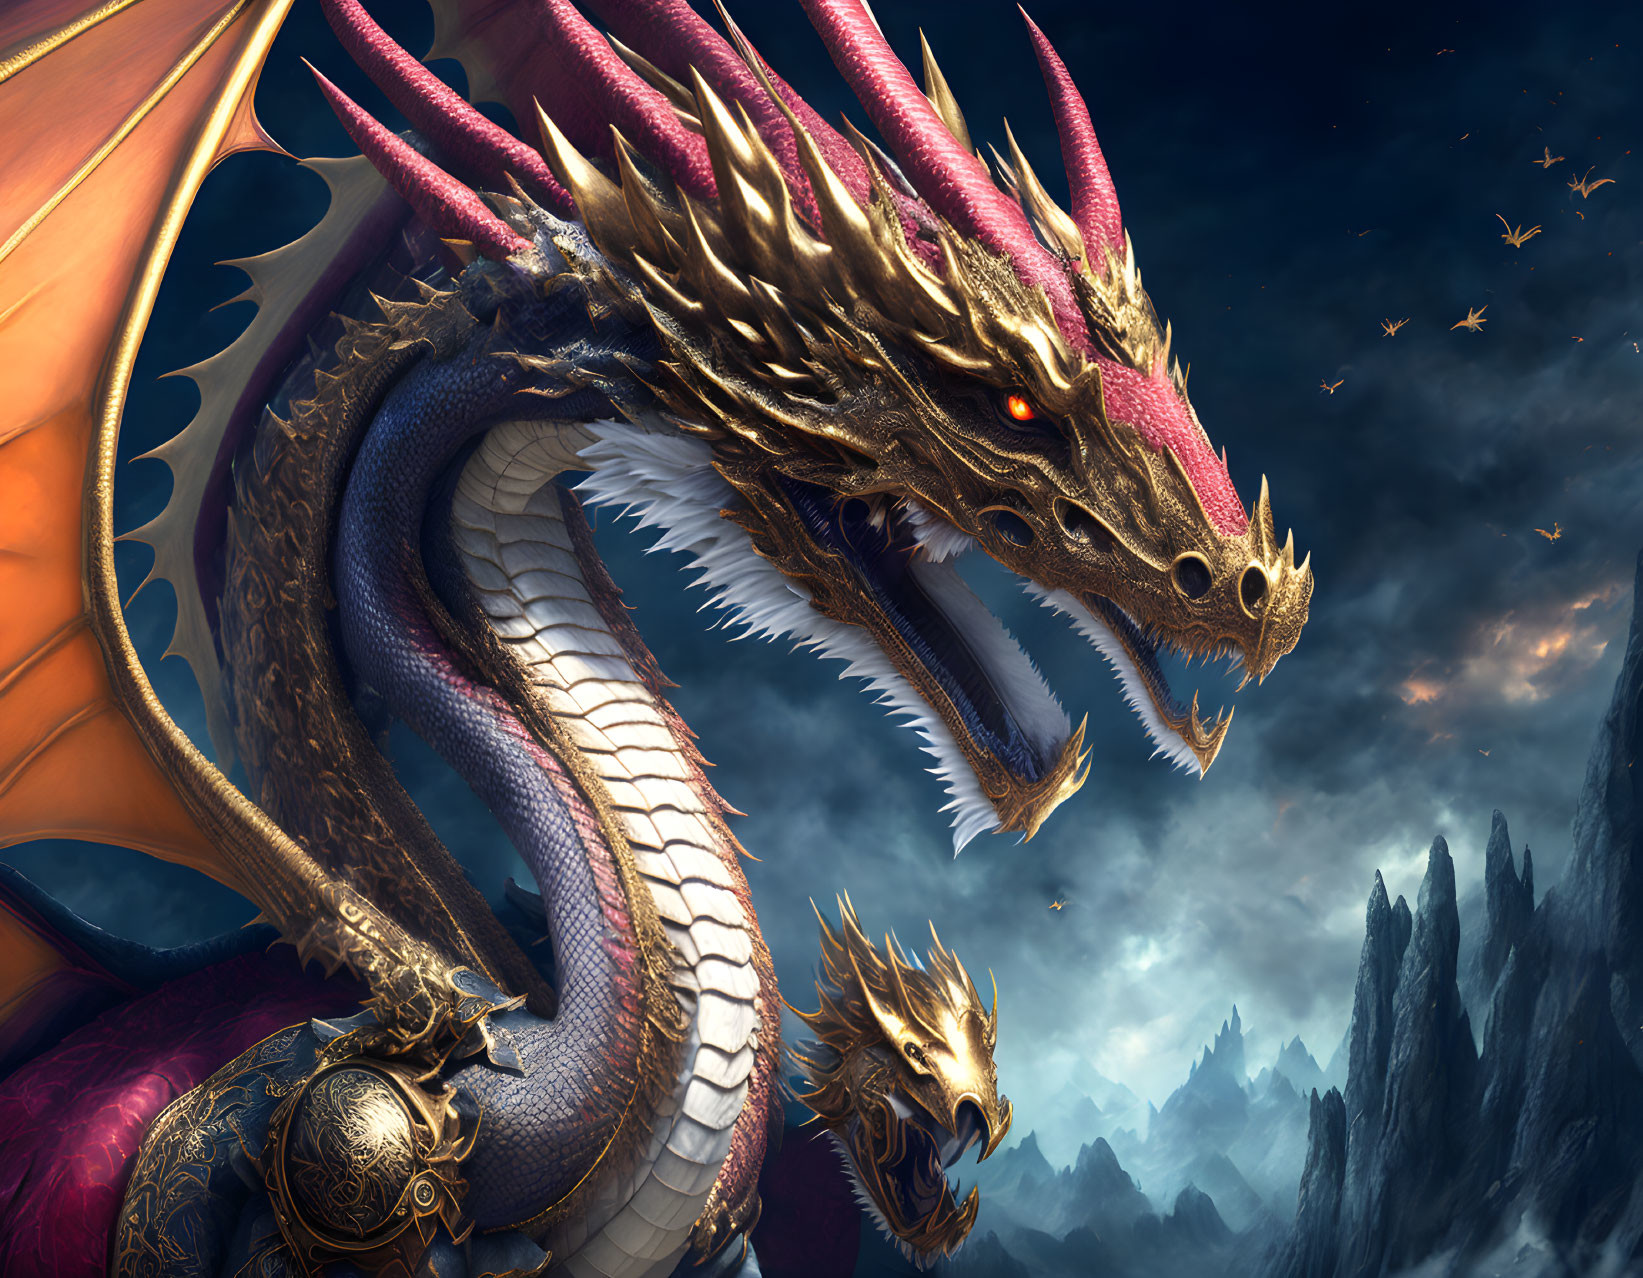 Majestic dragon with red eyes and horns in fiery mountain landscape